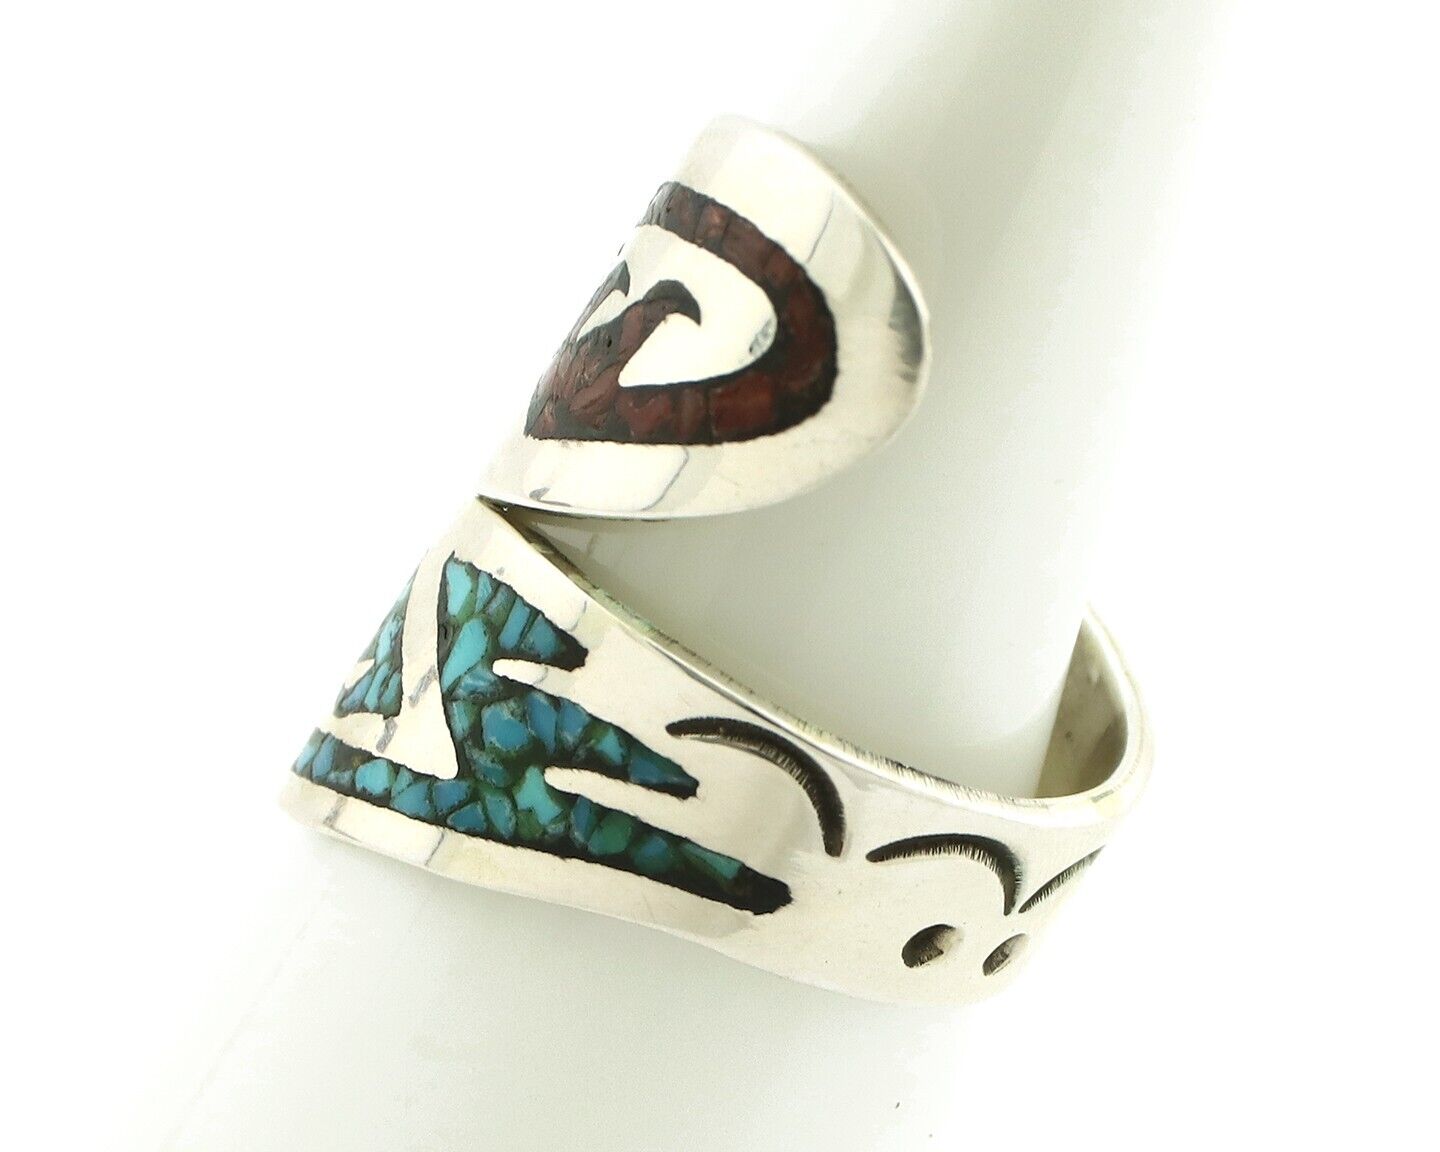 Navajo Chip Inlay Ring 925 Silver Turquoise & Coral Artist Native Artist C.80's